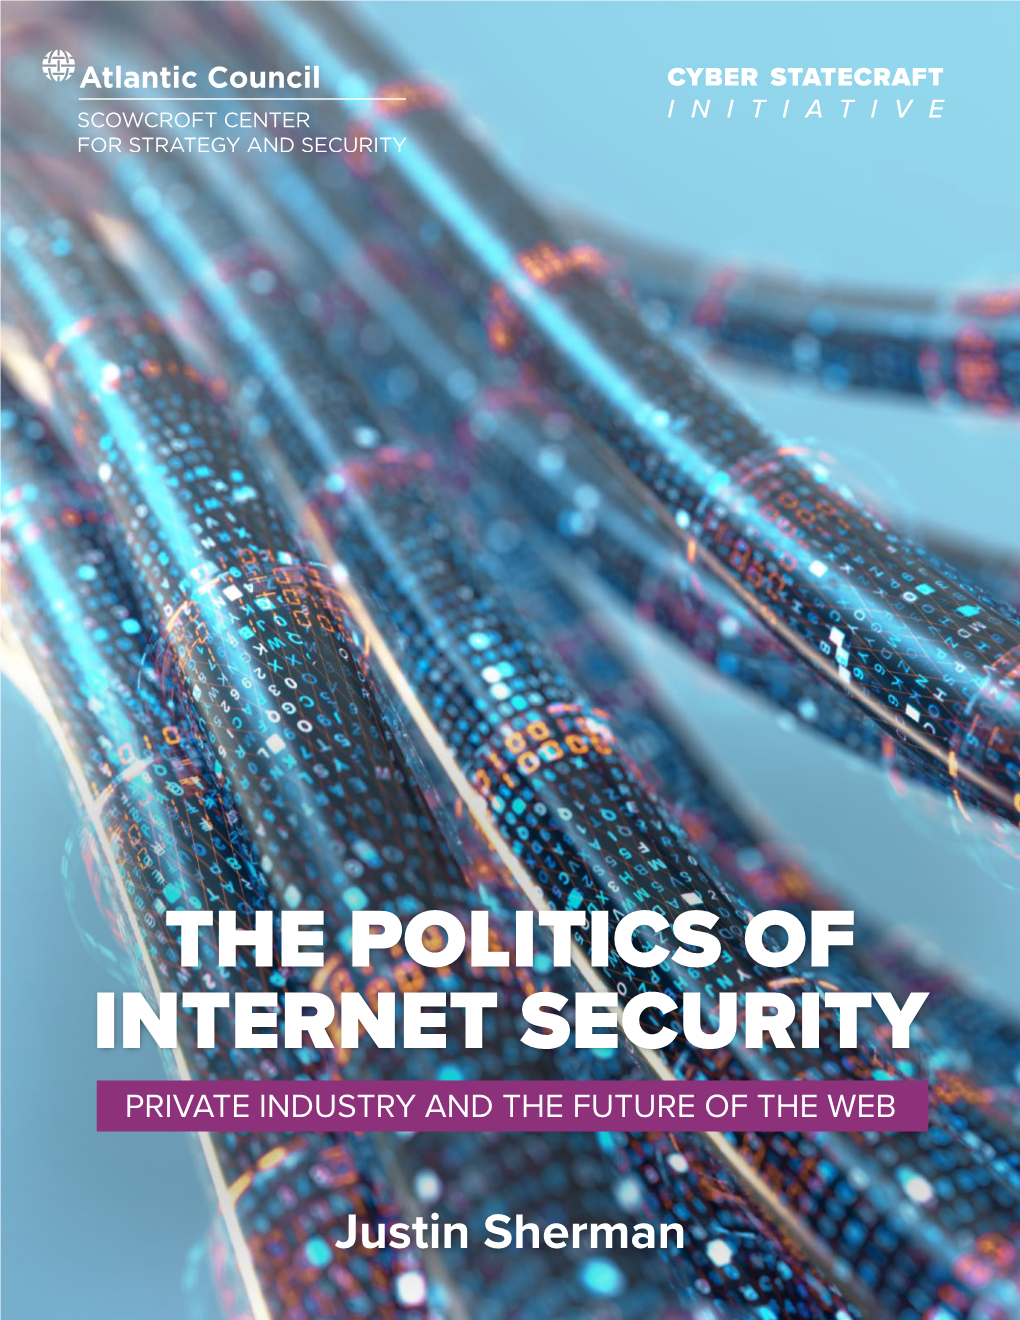 The Politics of Internet Security Private Industry and the Future of the Web